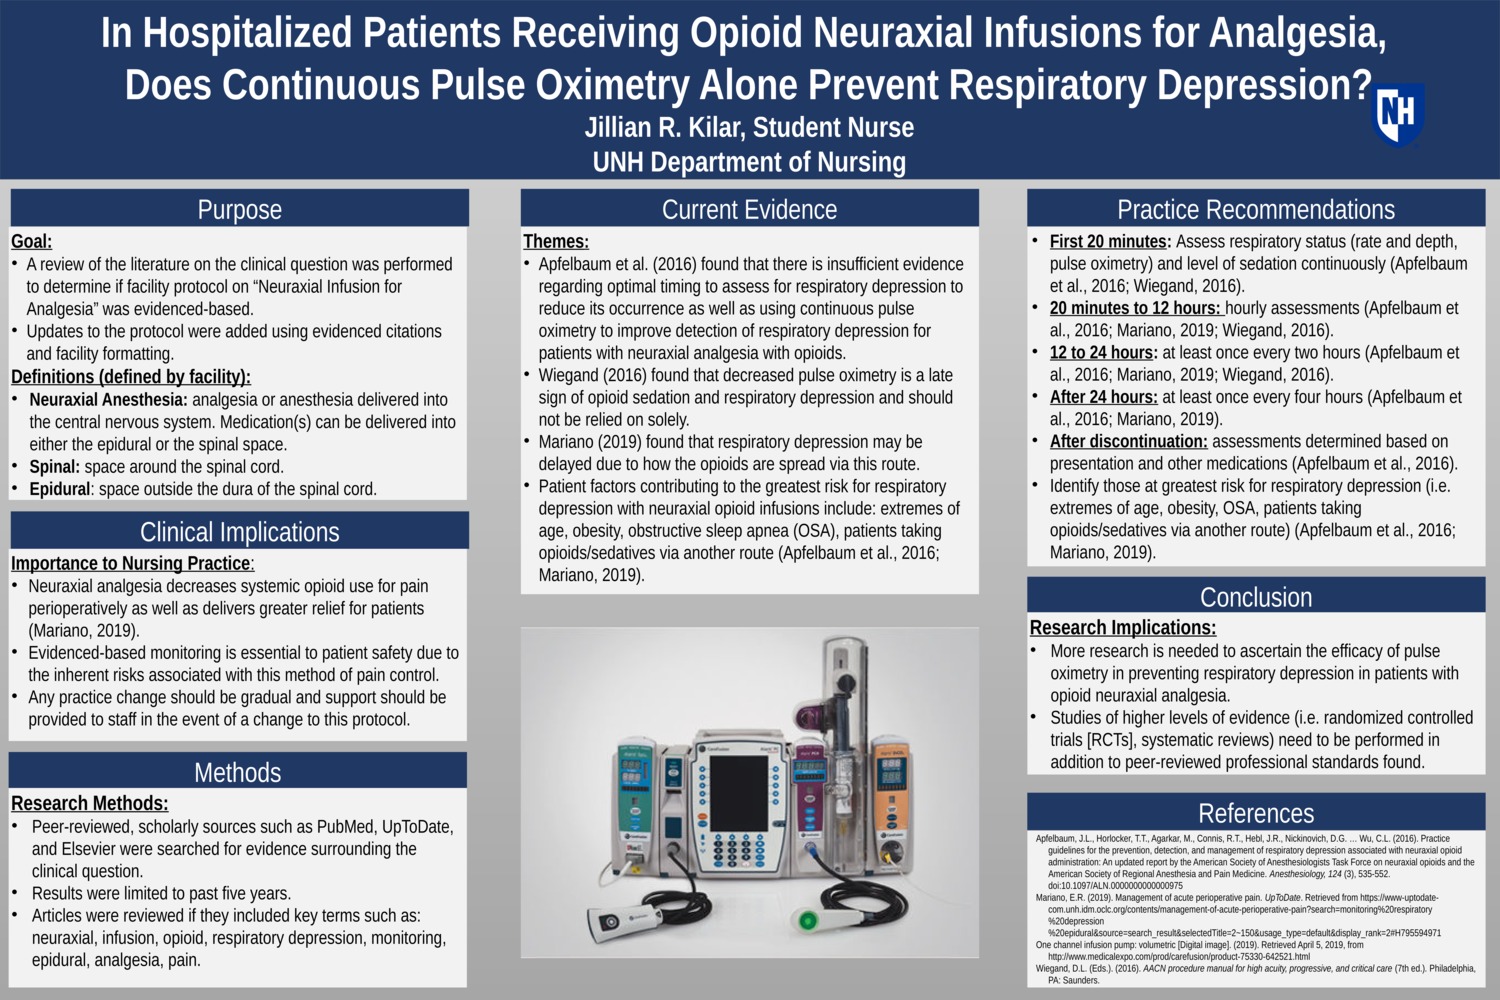 In Hospitalized Patients Receiving Opioid Neuraxial Infusions For Analgesia, Does Continuous Pulse Oximetry Alone Prevent Respiratory Depression? by jrk1007